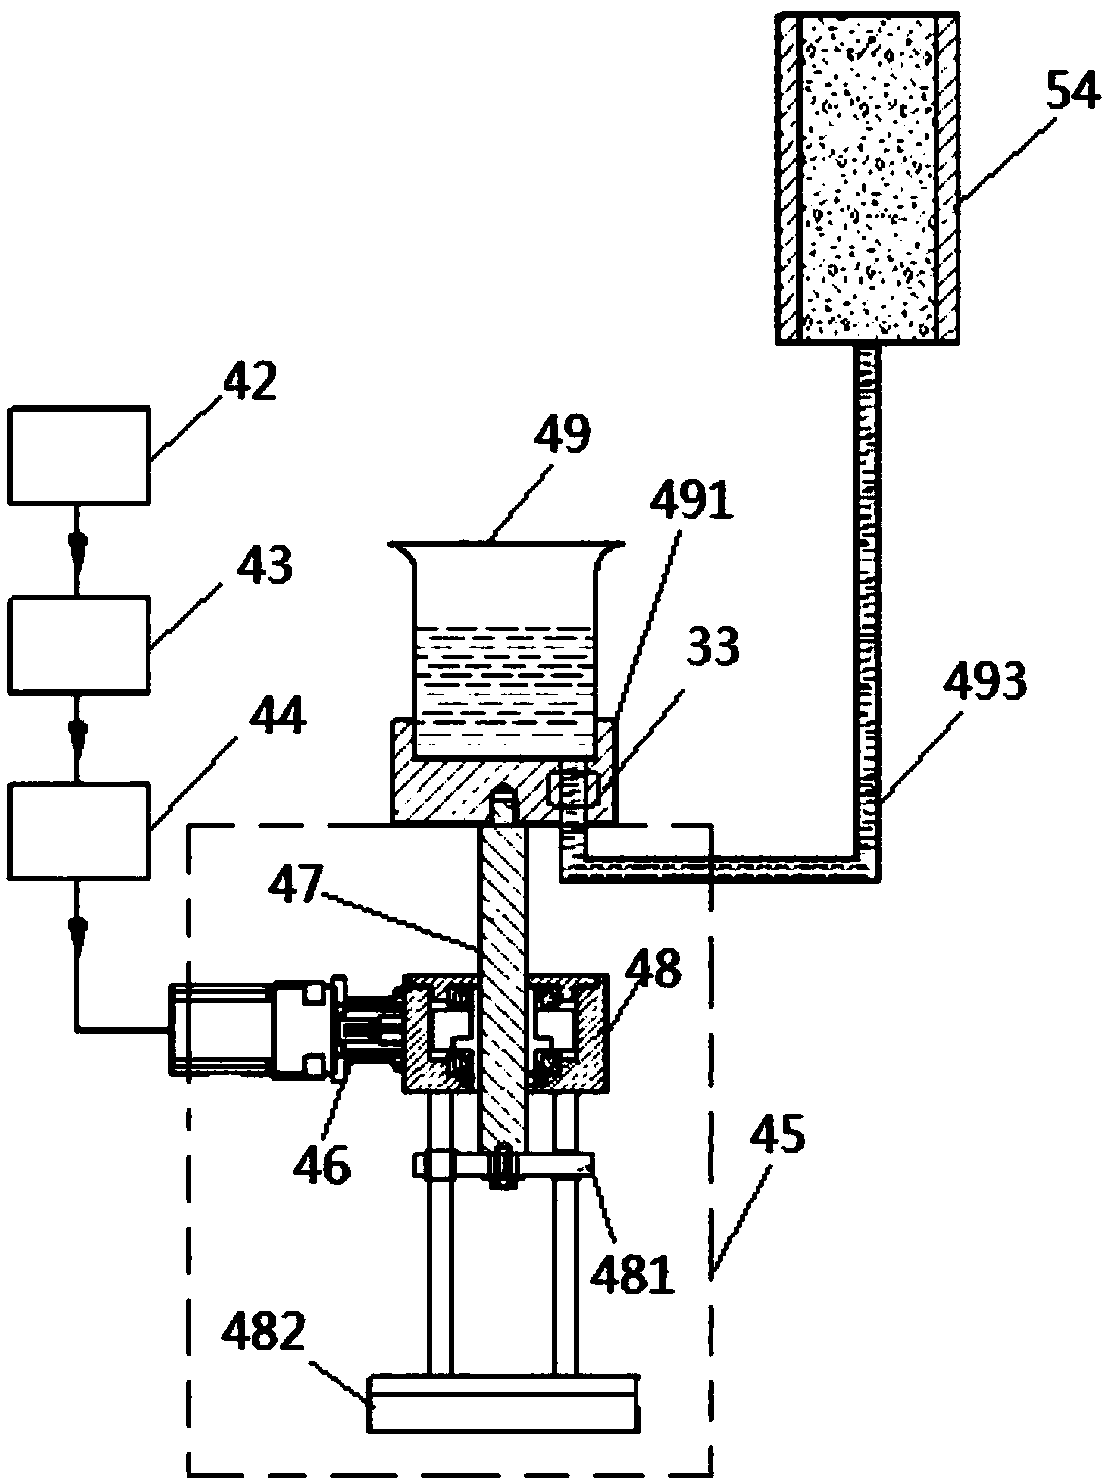 A mercury interface automatic adjustment system and a core pore structure measuring instrument